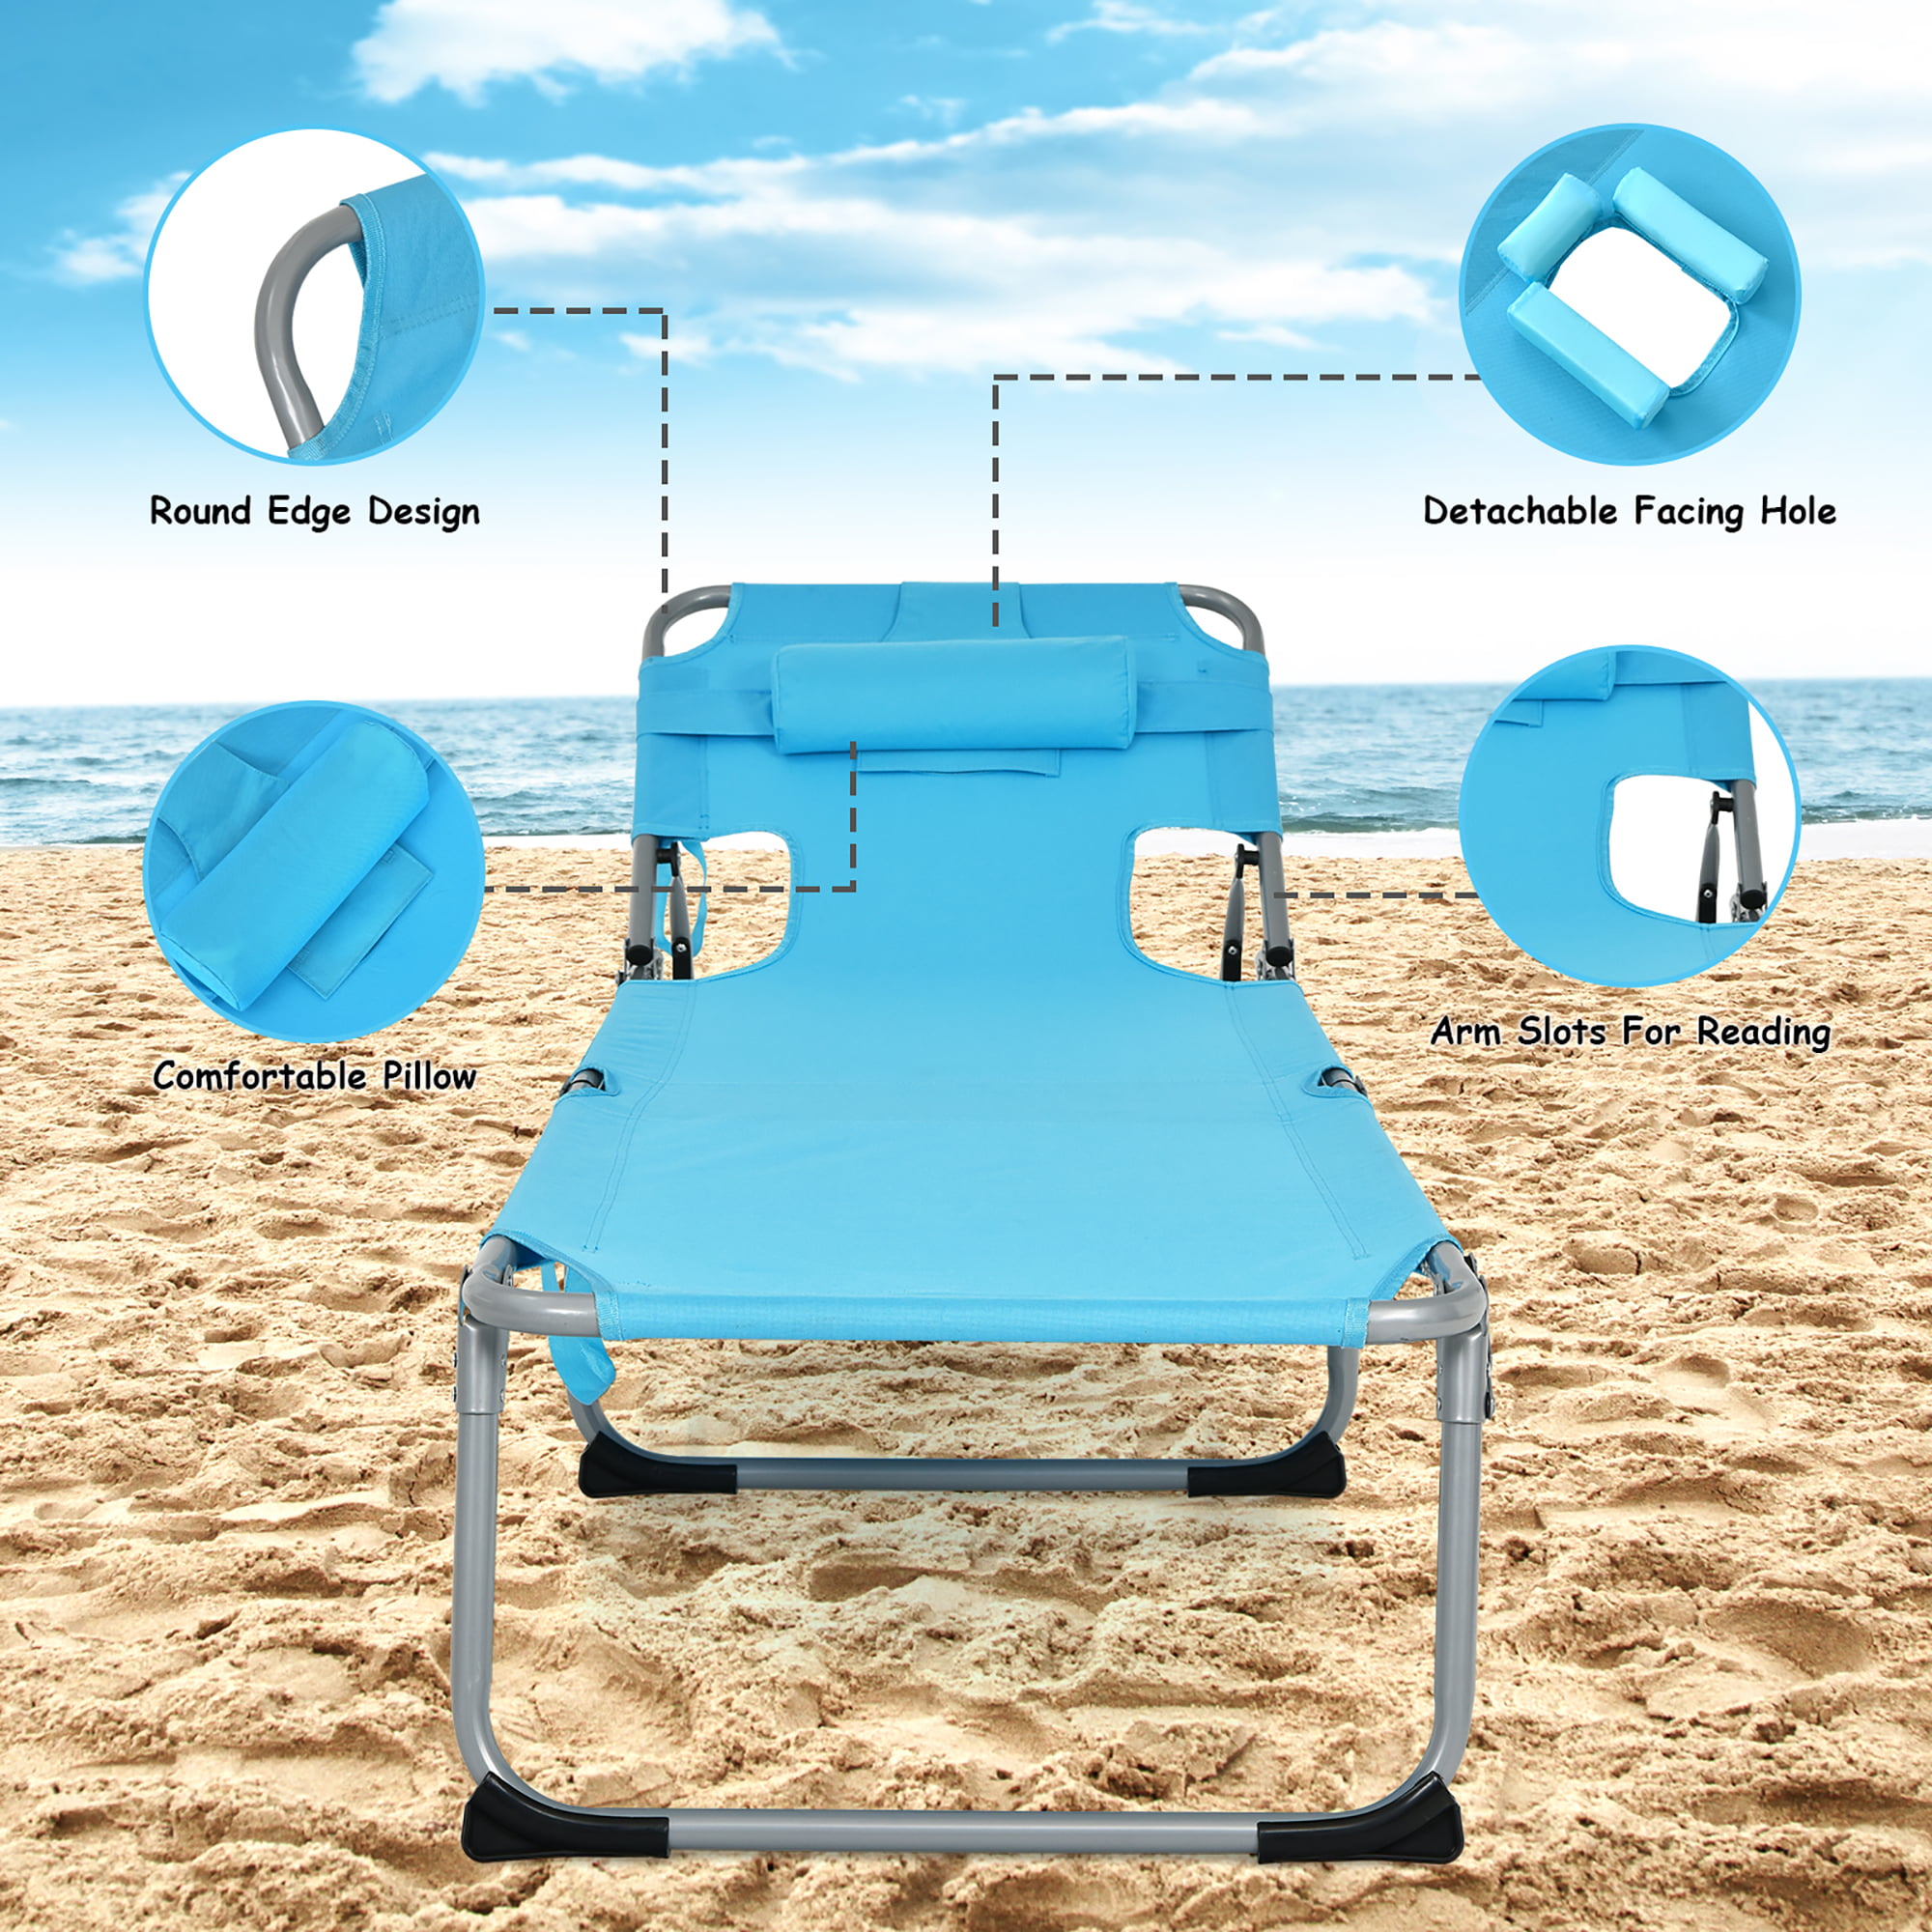 Goplus Outdoor Beach Lounge Chair Folding Chaise Lounge with Pillow Turquoise - image 3 of 8